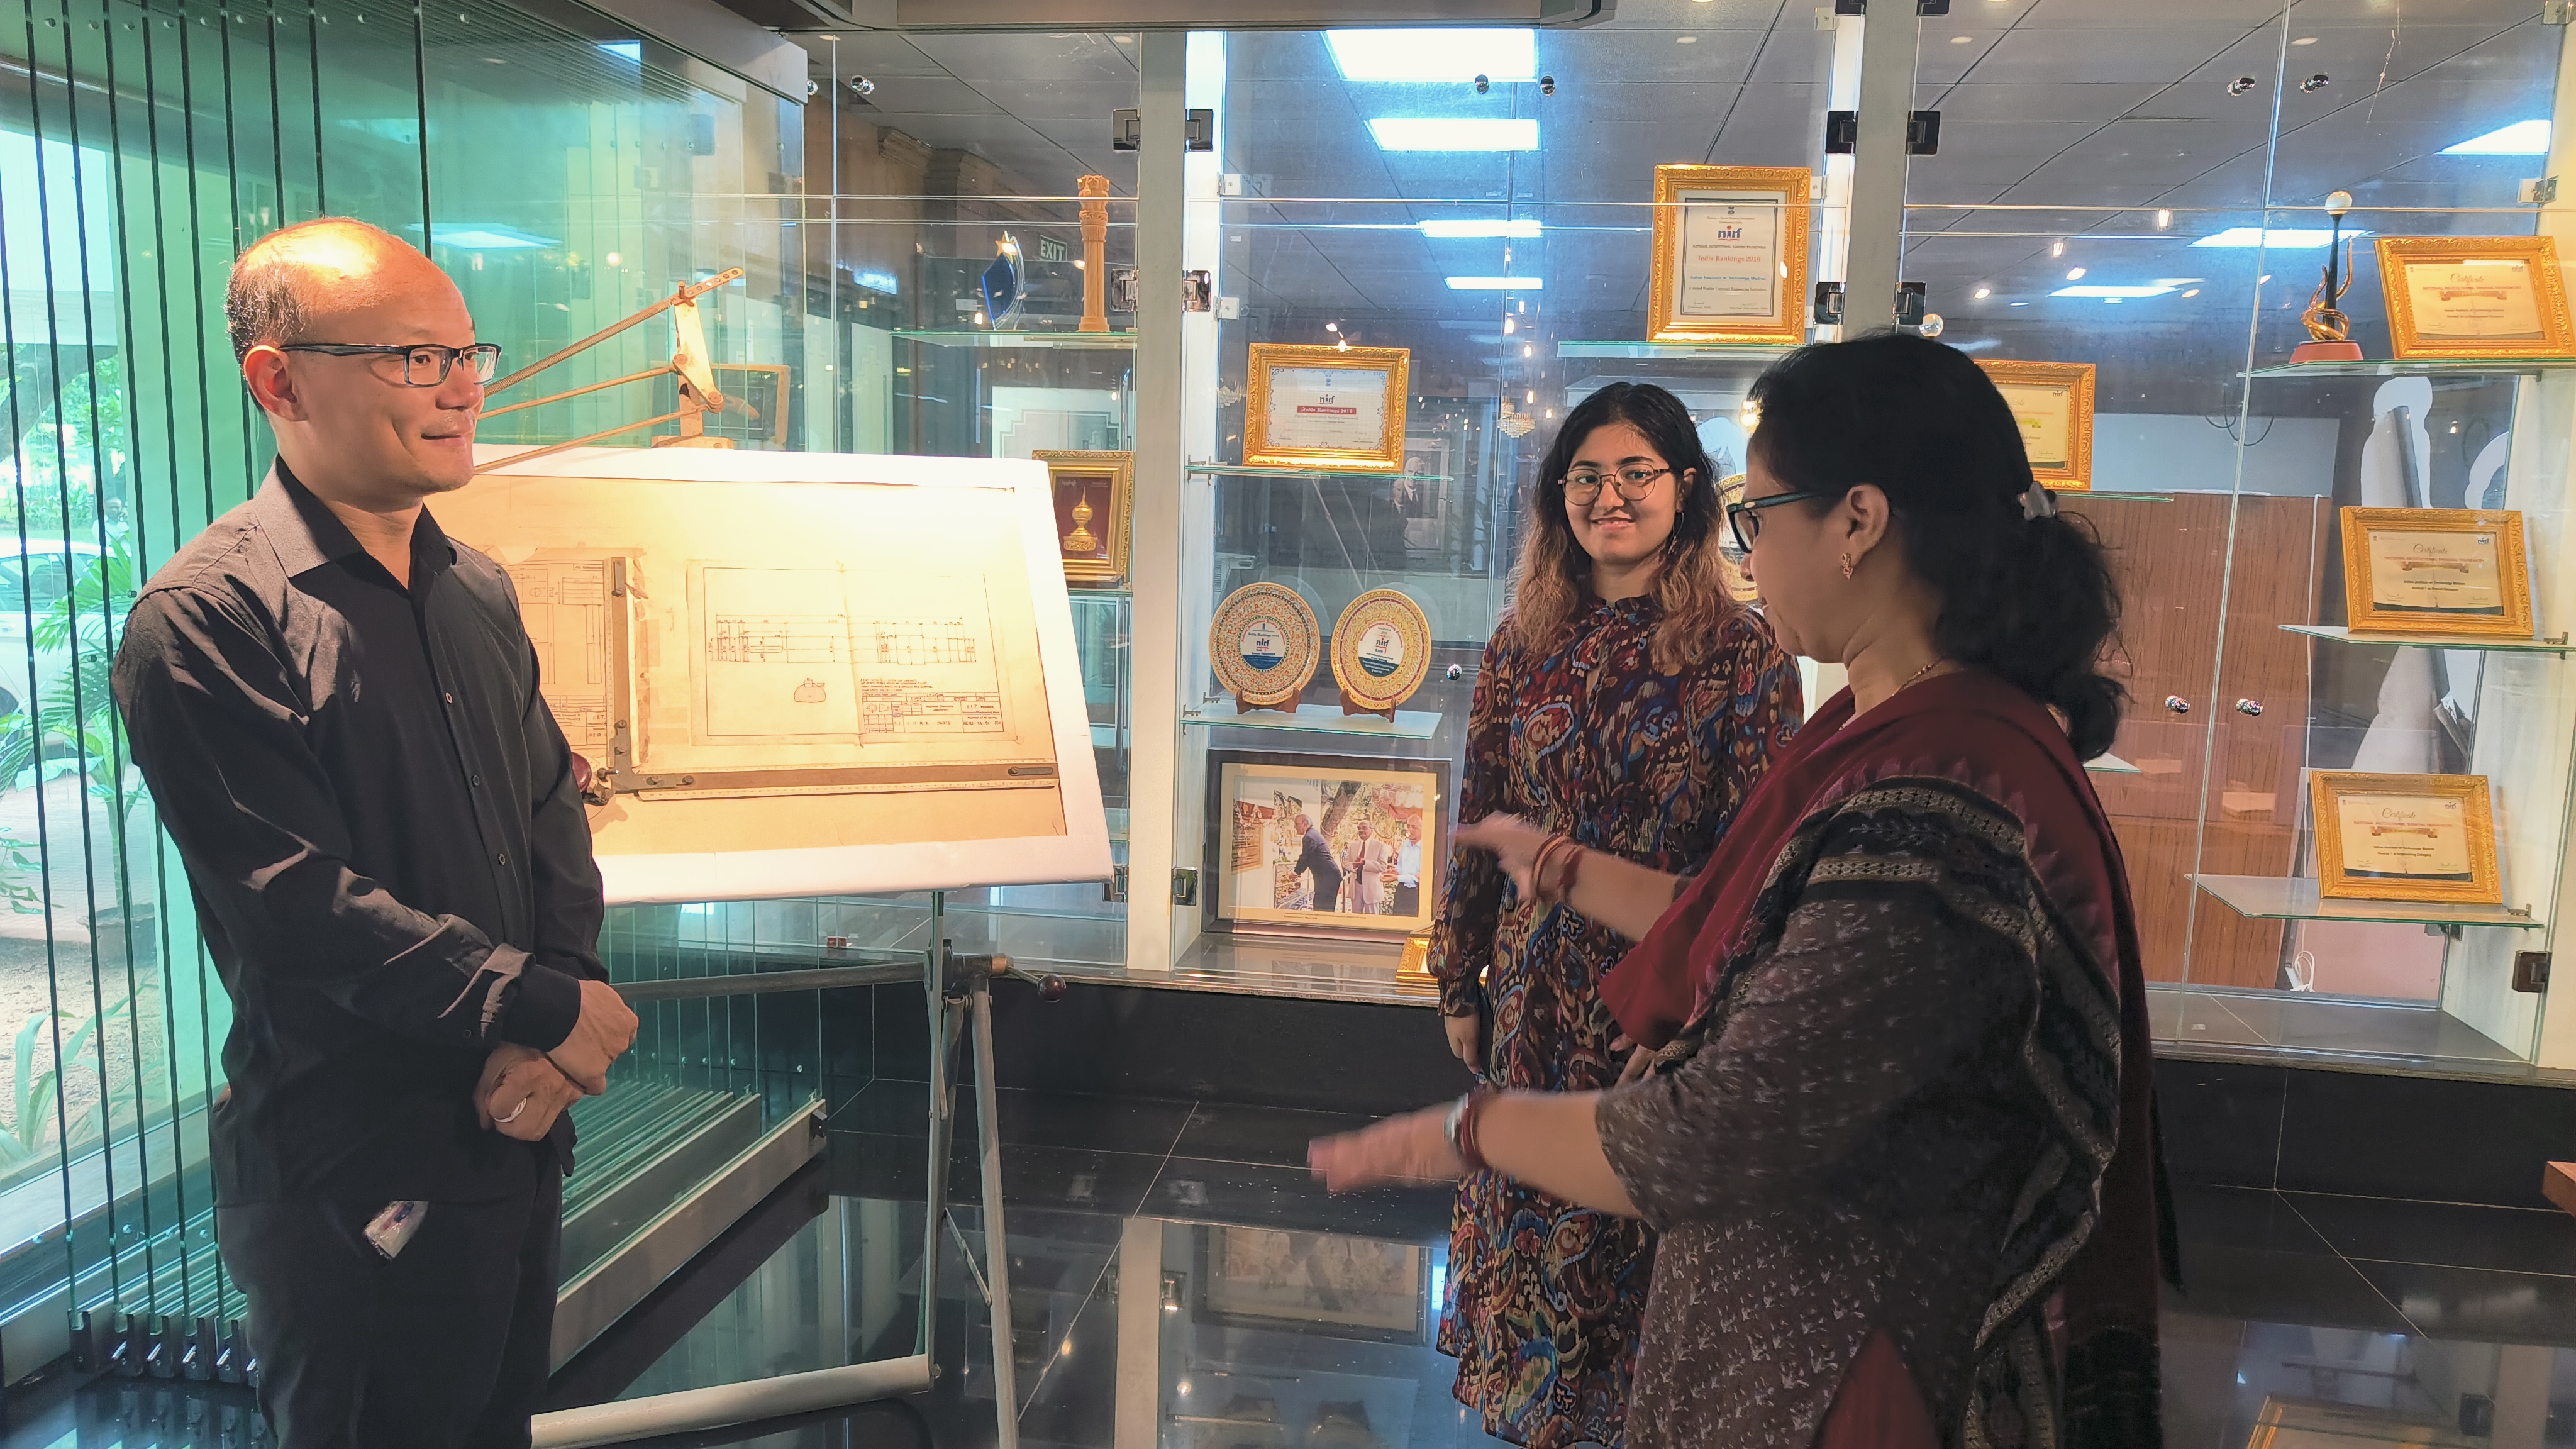 Professor Zhang is taken on the Heritage Centre tour by Ms. Mamata Dash (Senior Project Officer, right) and Ms. Ashlin Deena Mathews (Project Associate, centre)